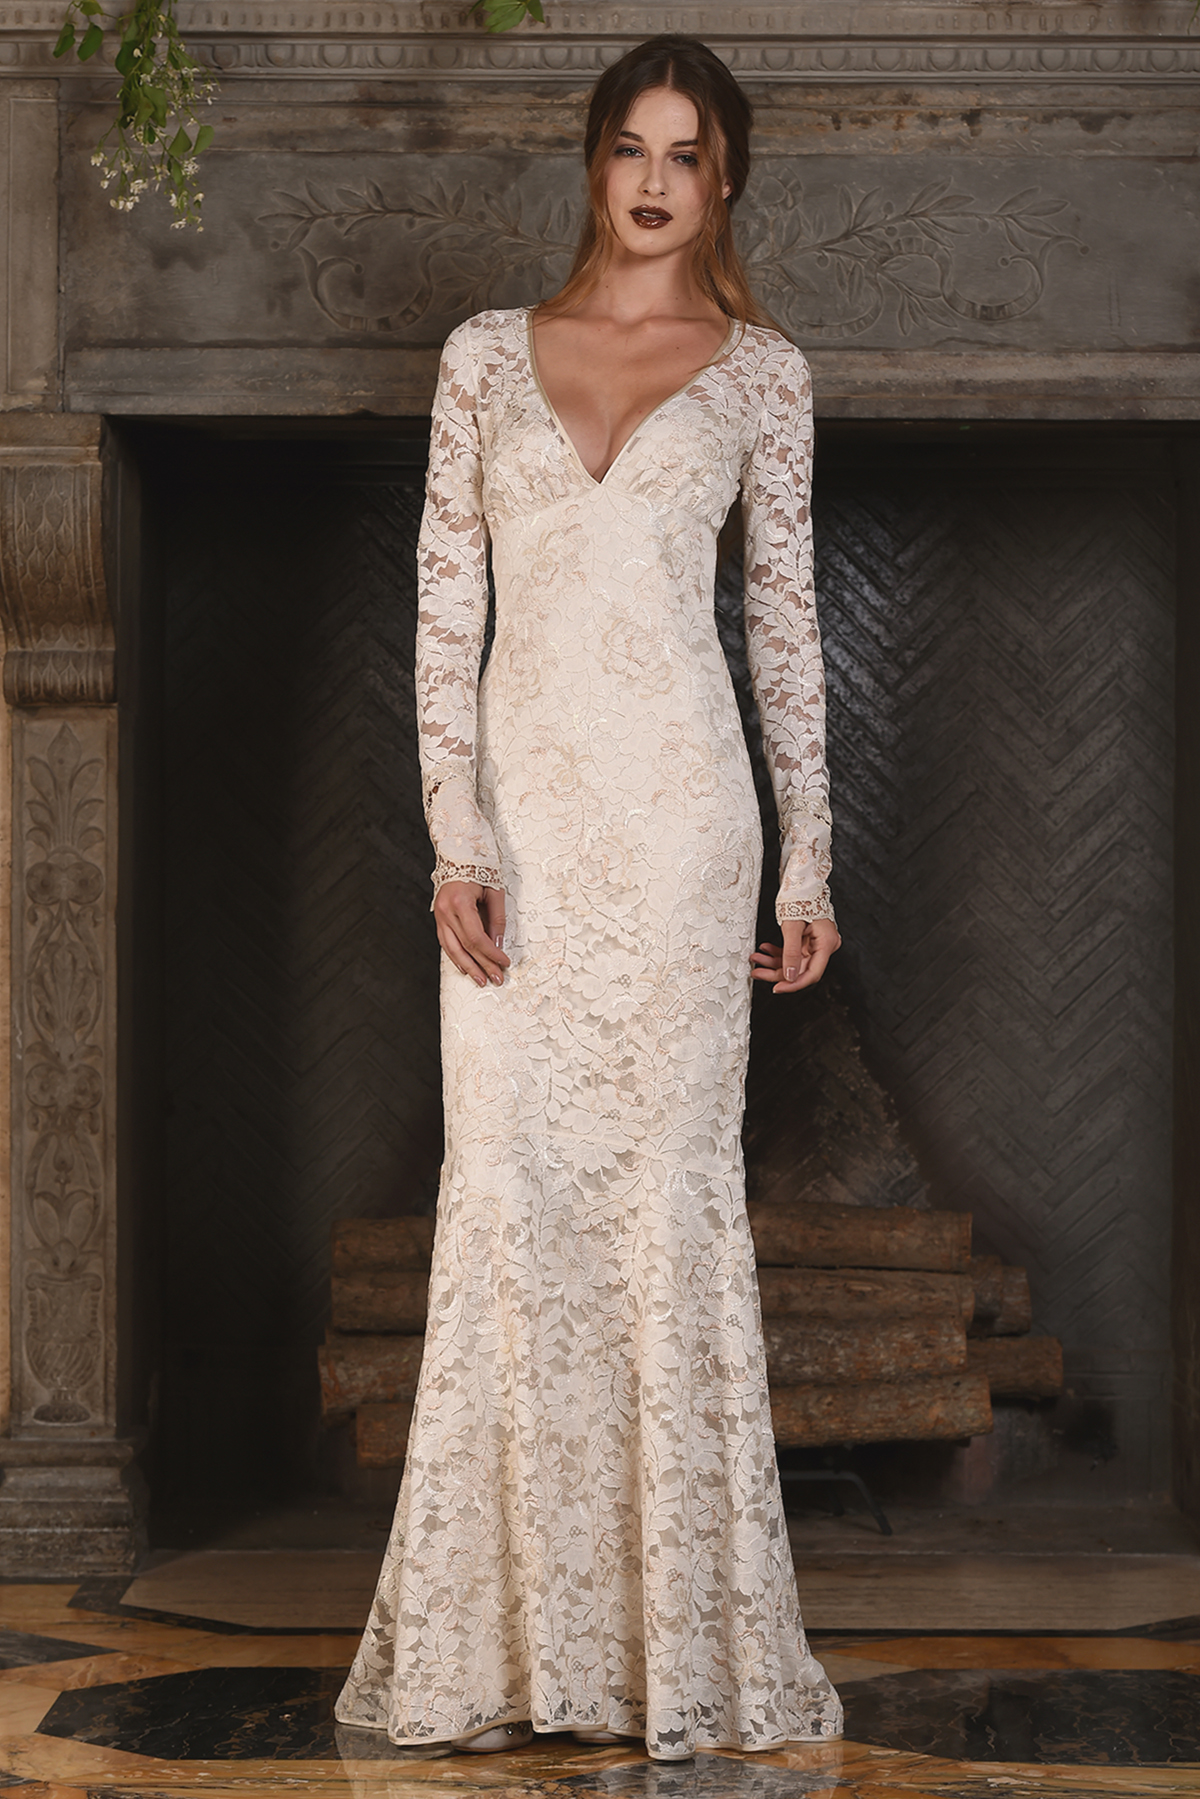 The Amber gown, from Claire Pettibone's 'The Four Seasons' bridal couture collection for 2017.